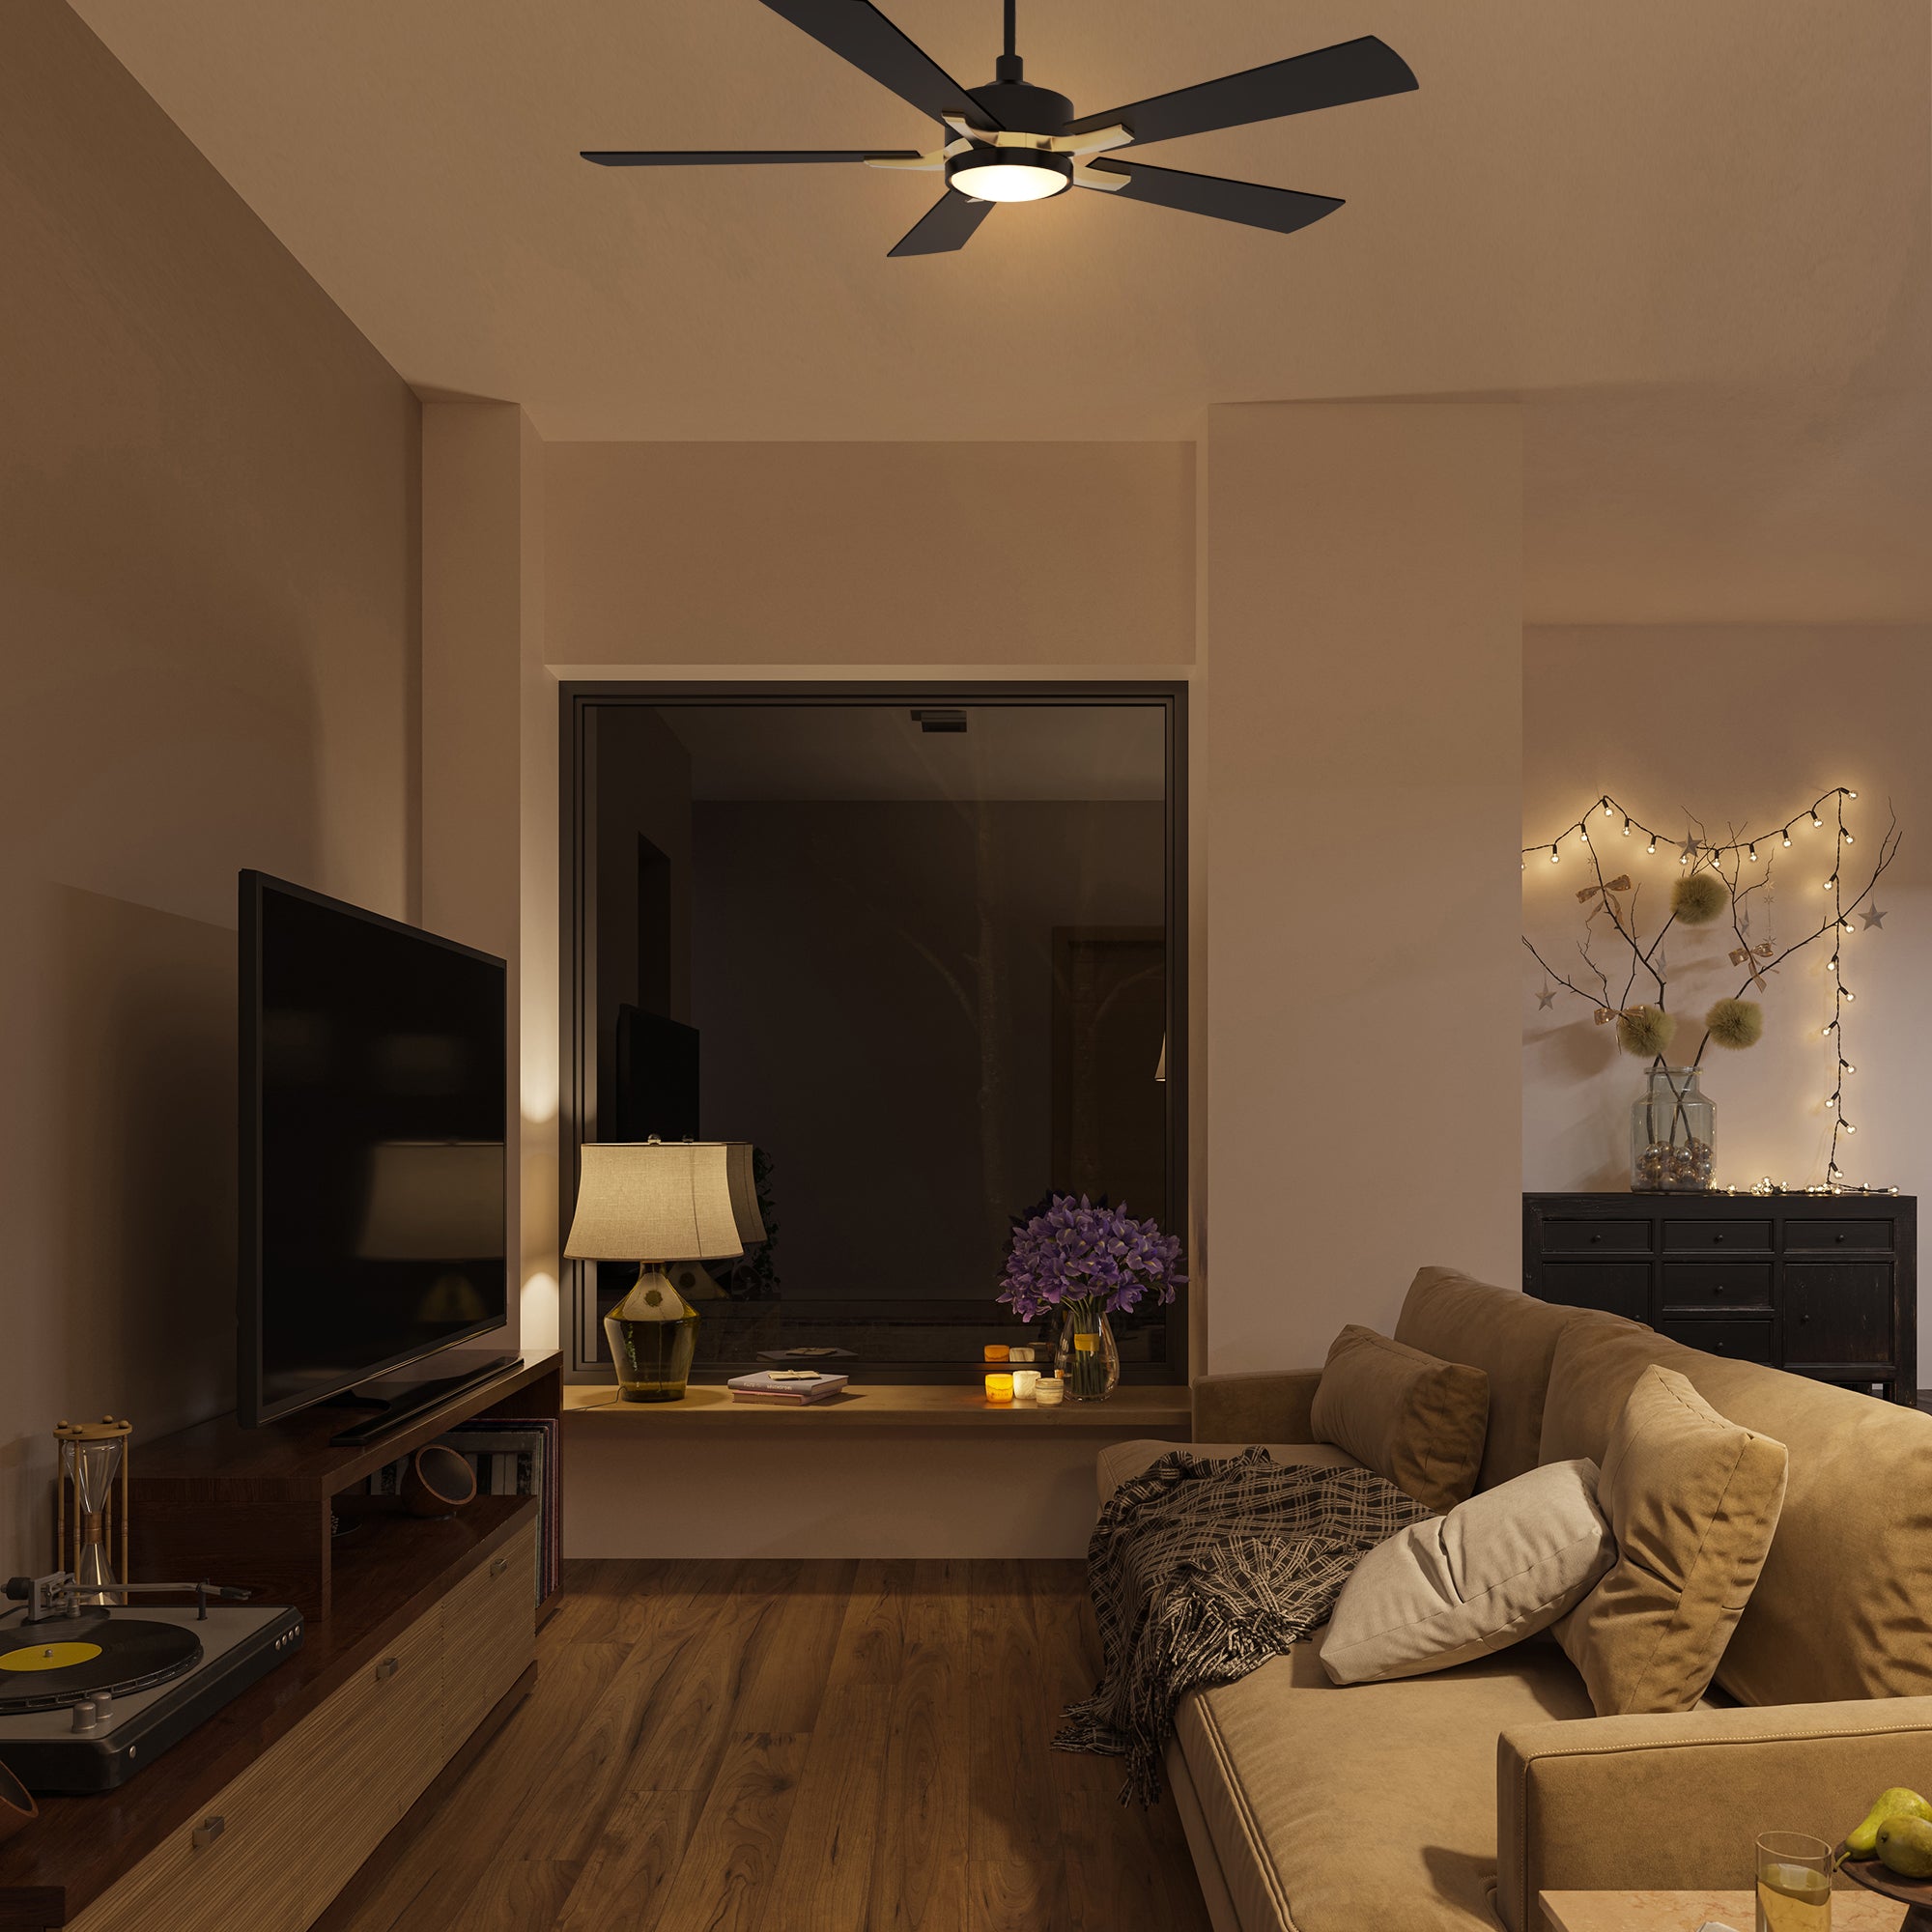 The Smafan Apex 56'' smart ceiling fan keeps your space cool, bright, and stylish. It is a soft modern masterpiece perfect for your large indoor living spaces. This Wifi smart ceiling fan is a simplicity designing with Black finish, use elegant Plywood blades and has an integrated 4000K LED daylight. #color_Black&Gold